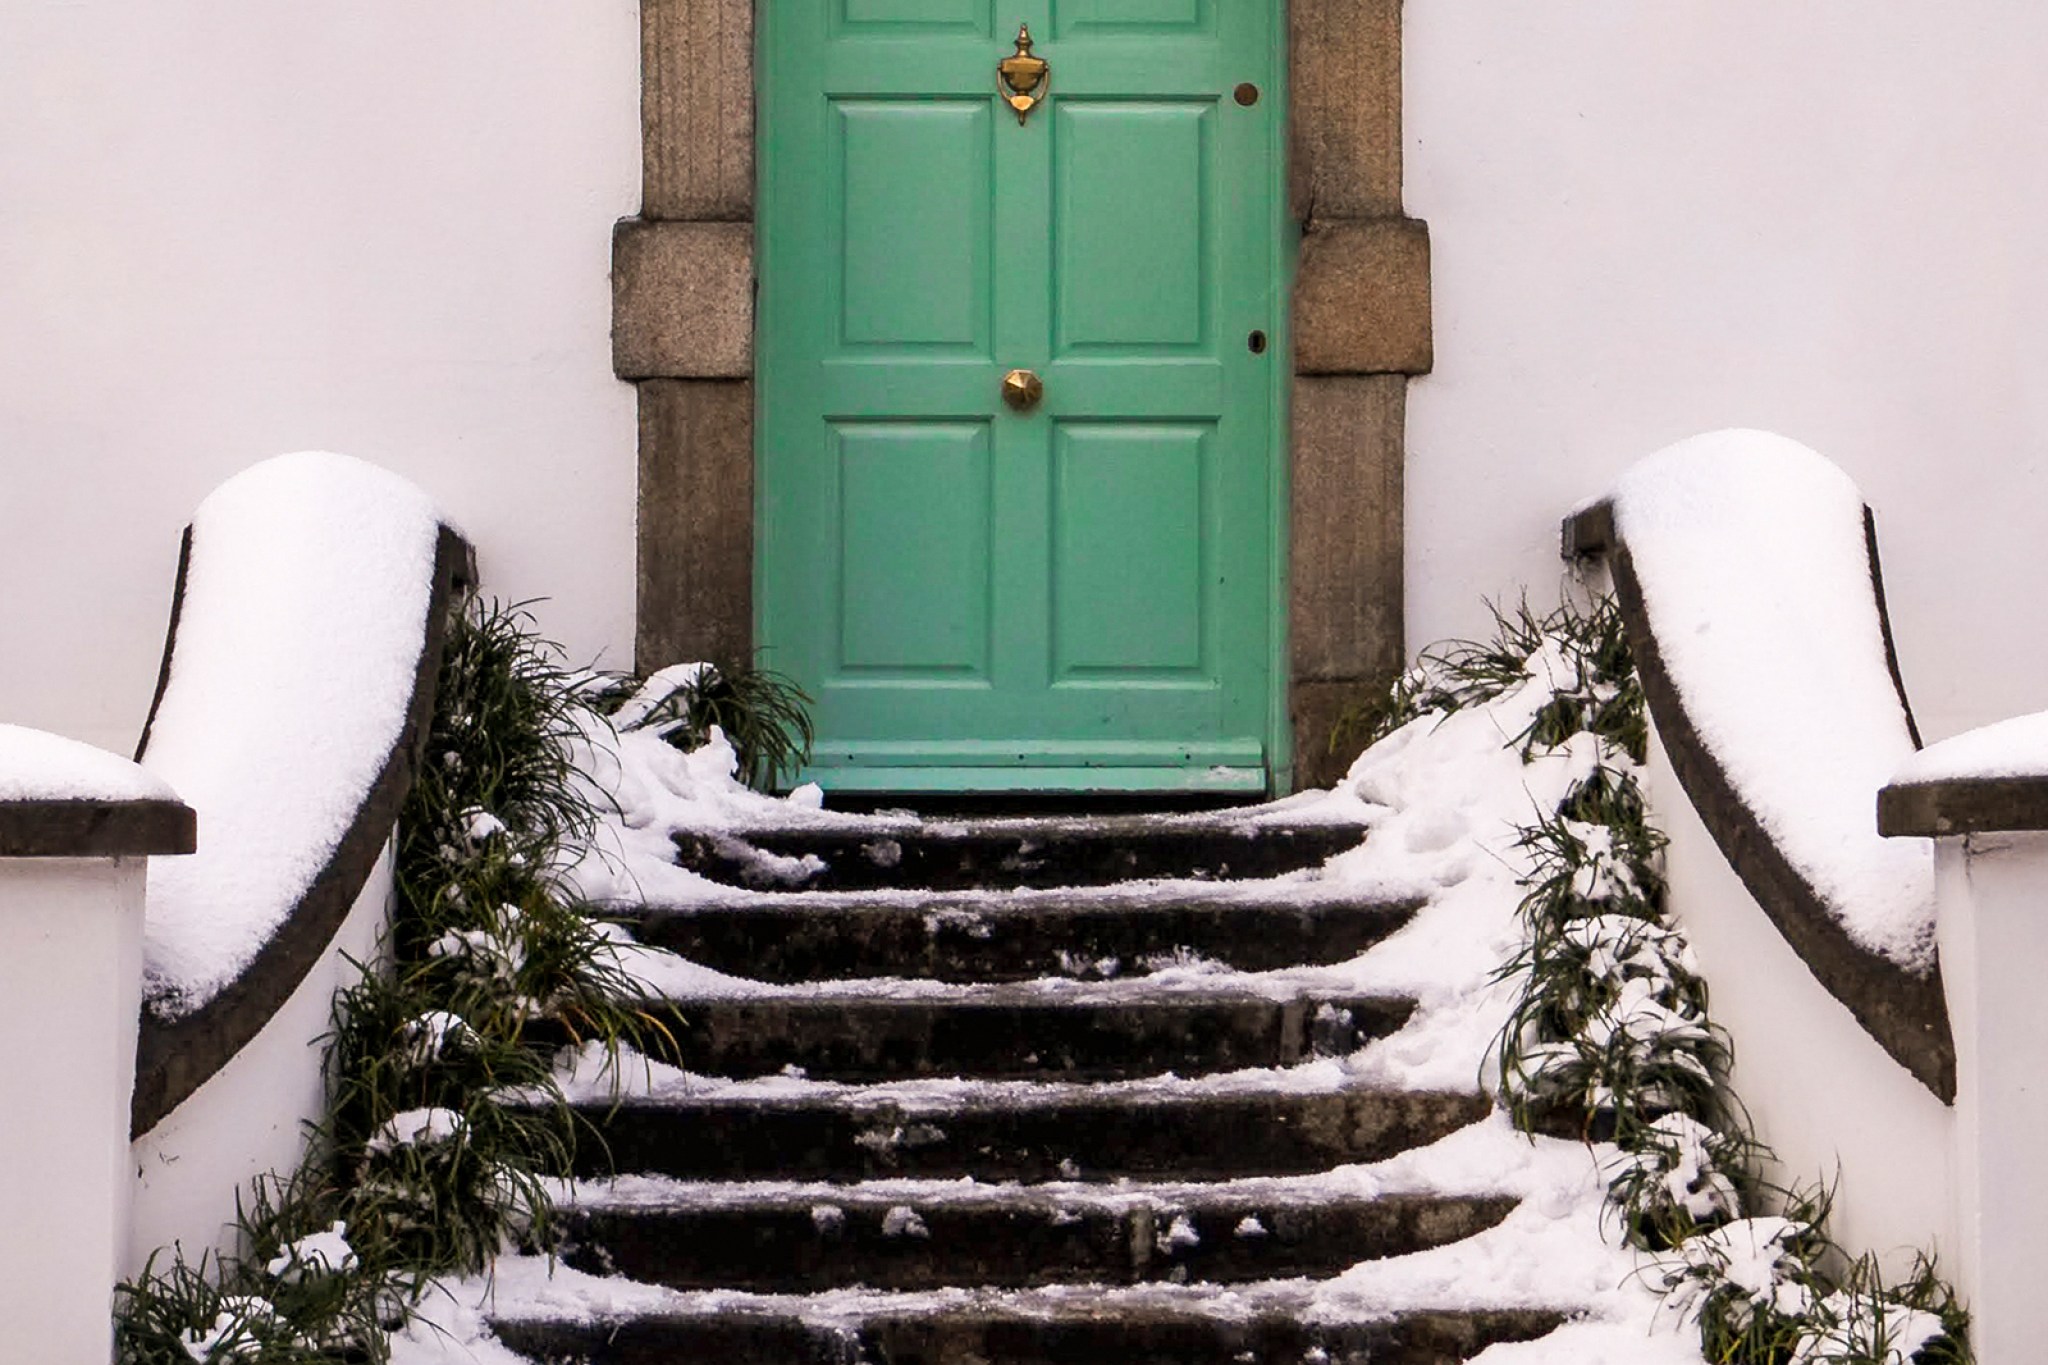 Green door at top of snowy, icy steps lined with plants